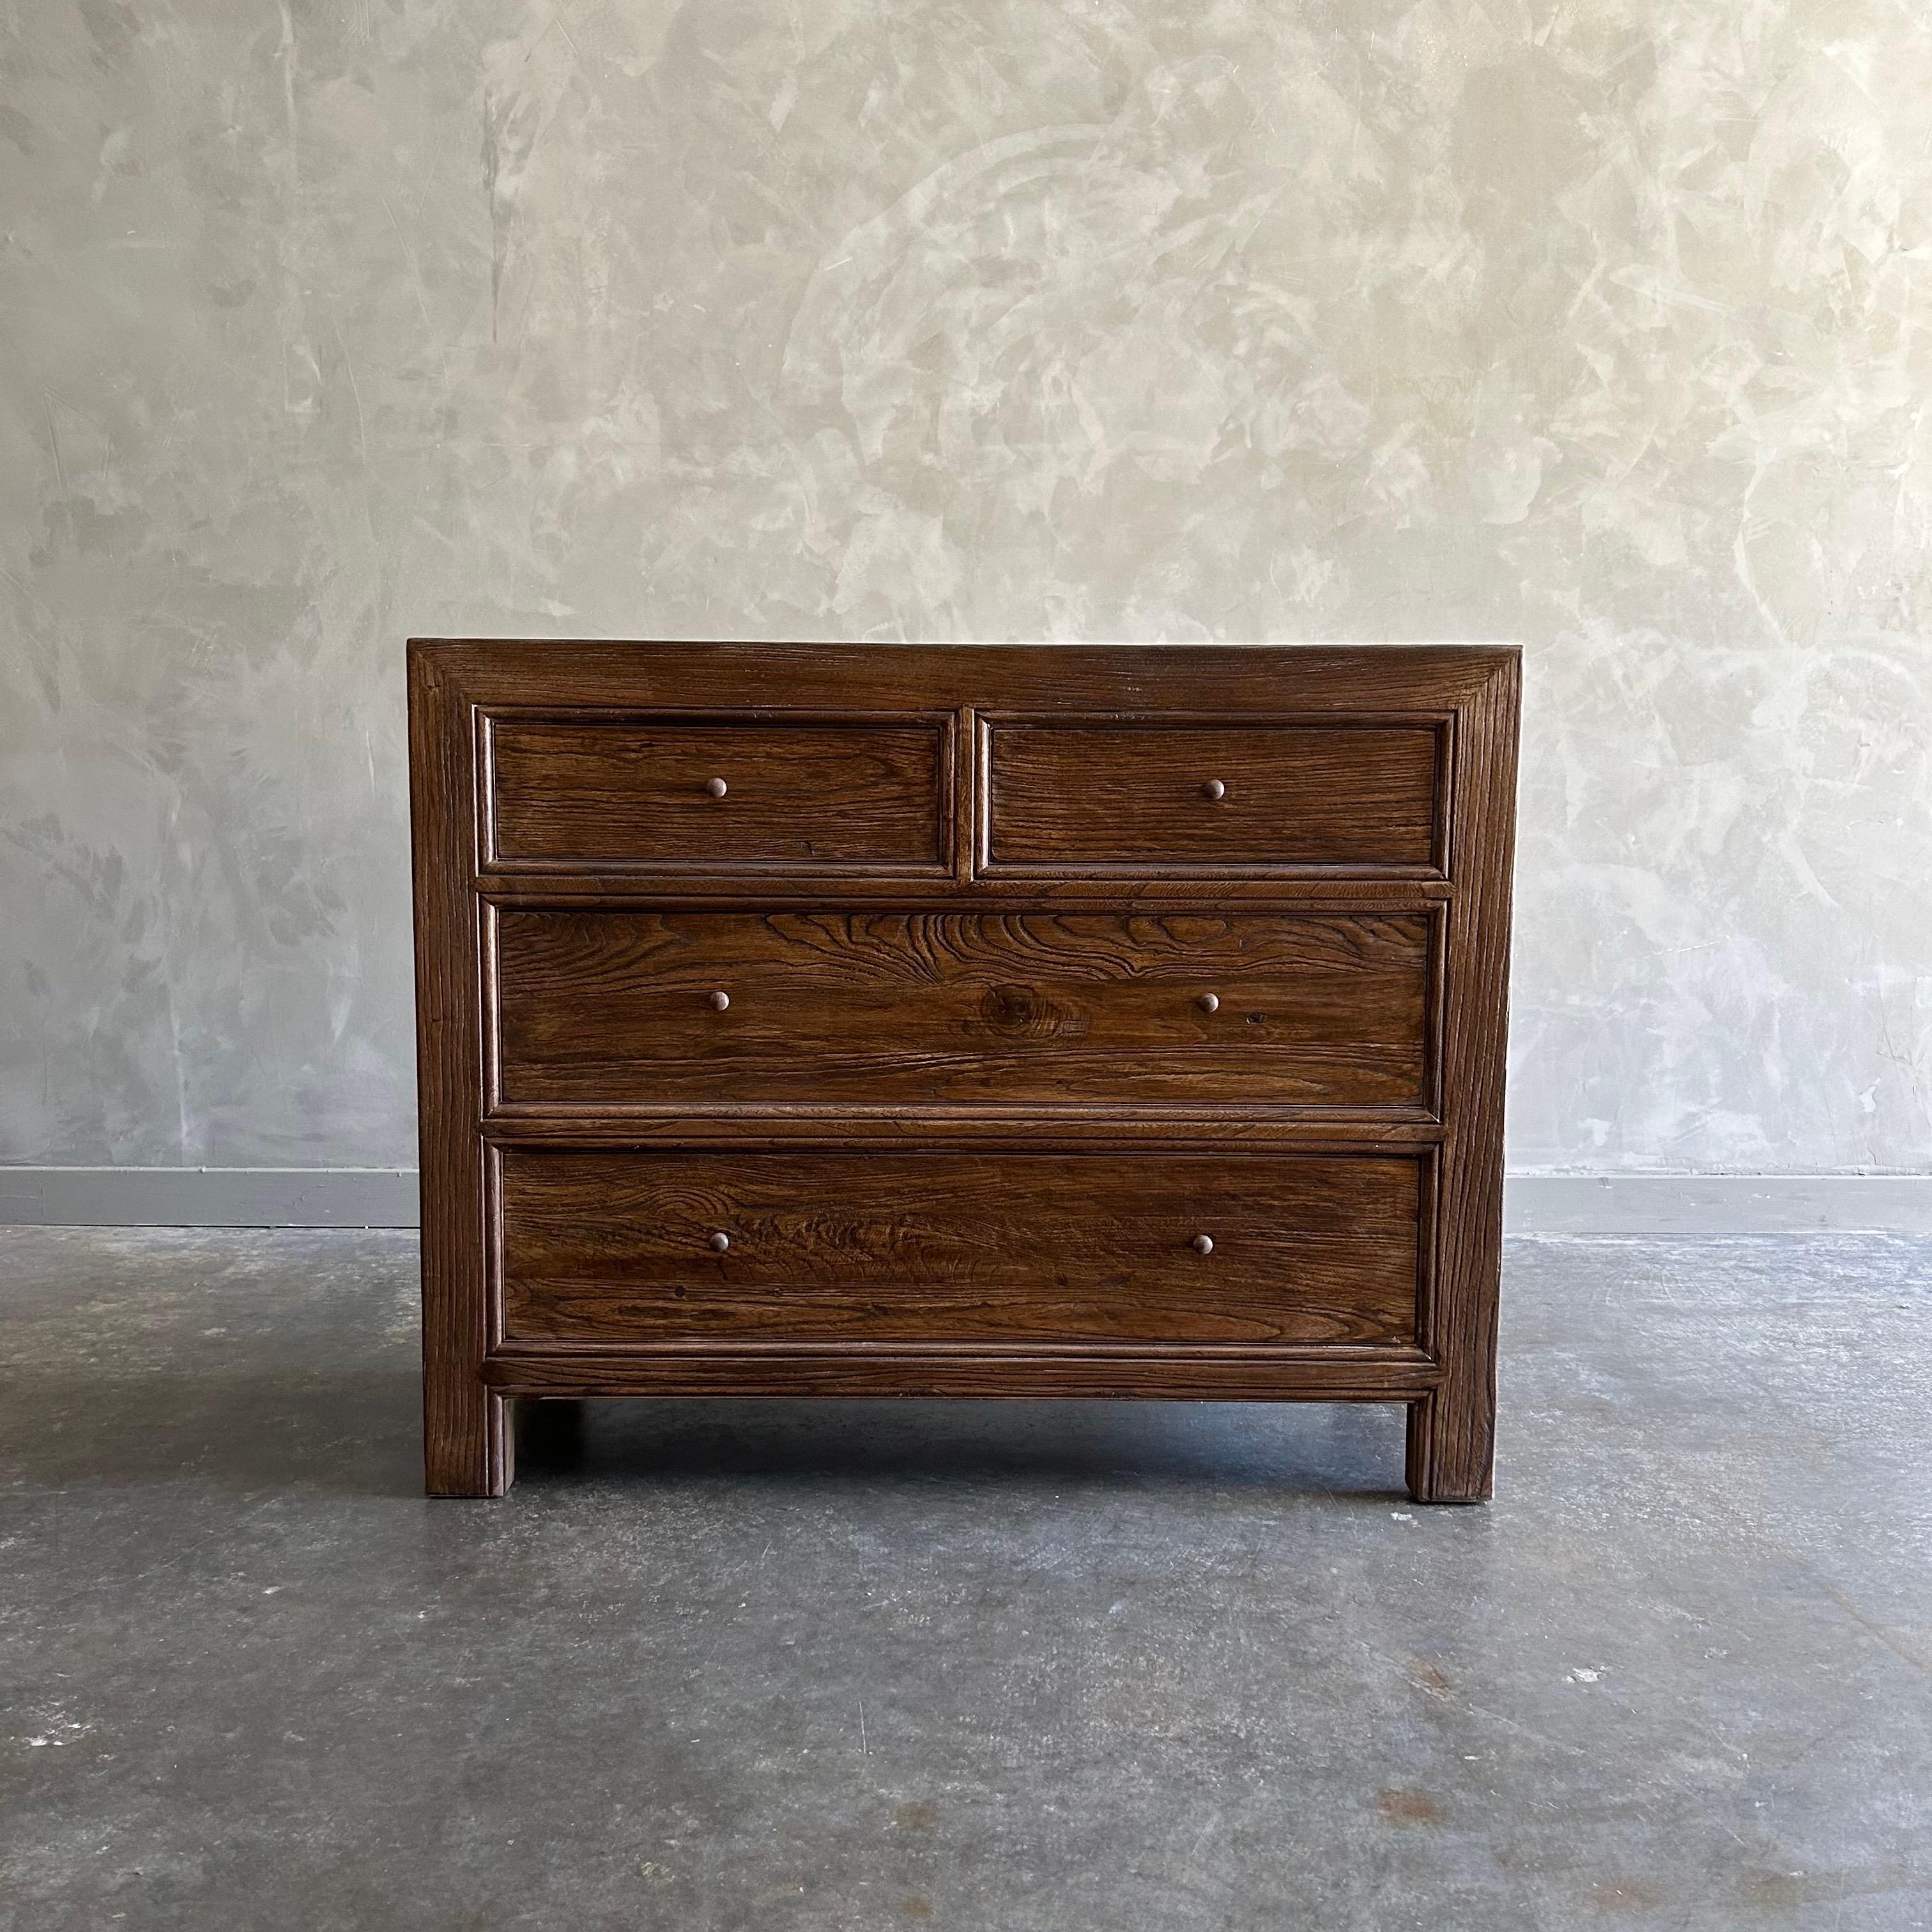 Our dresser is custom made from reclaimed elm wood in a dark walnut finish, The eco-friendly dresser, is a great additional to any space. Experience the beauty of reclaimed wood while enjoying the convenience of abundant storage.
Dovetail